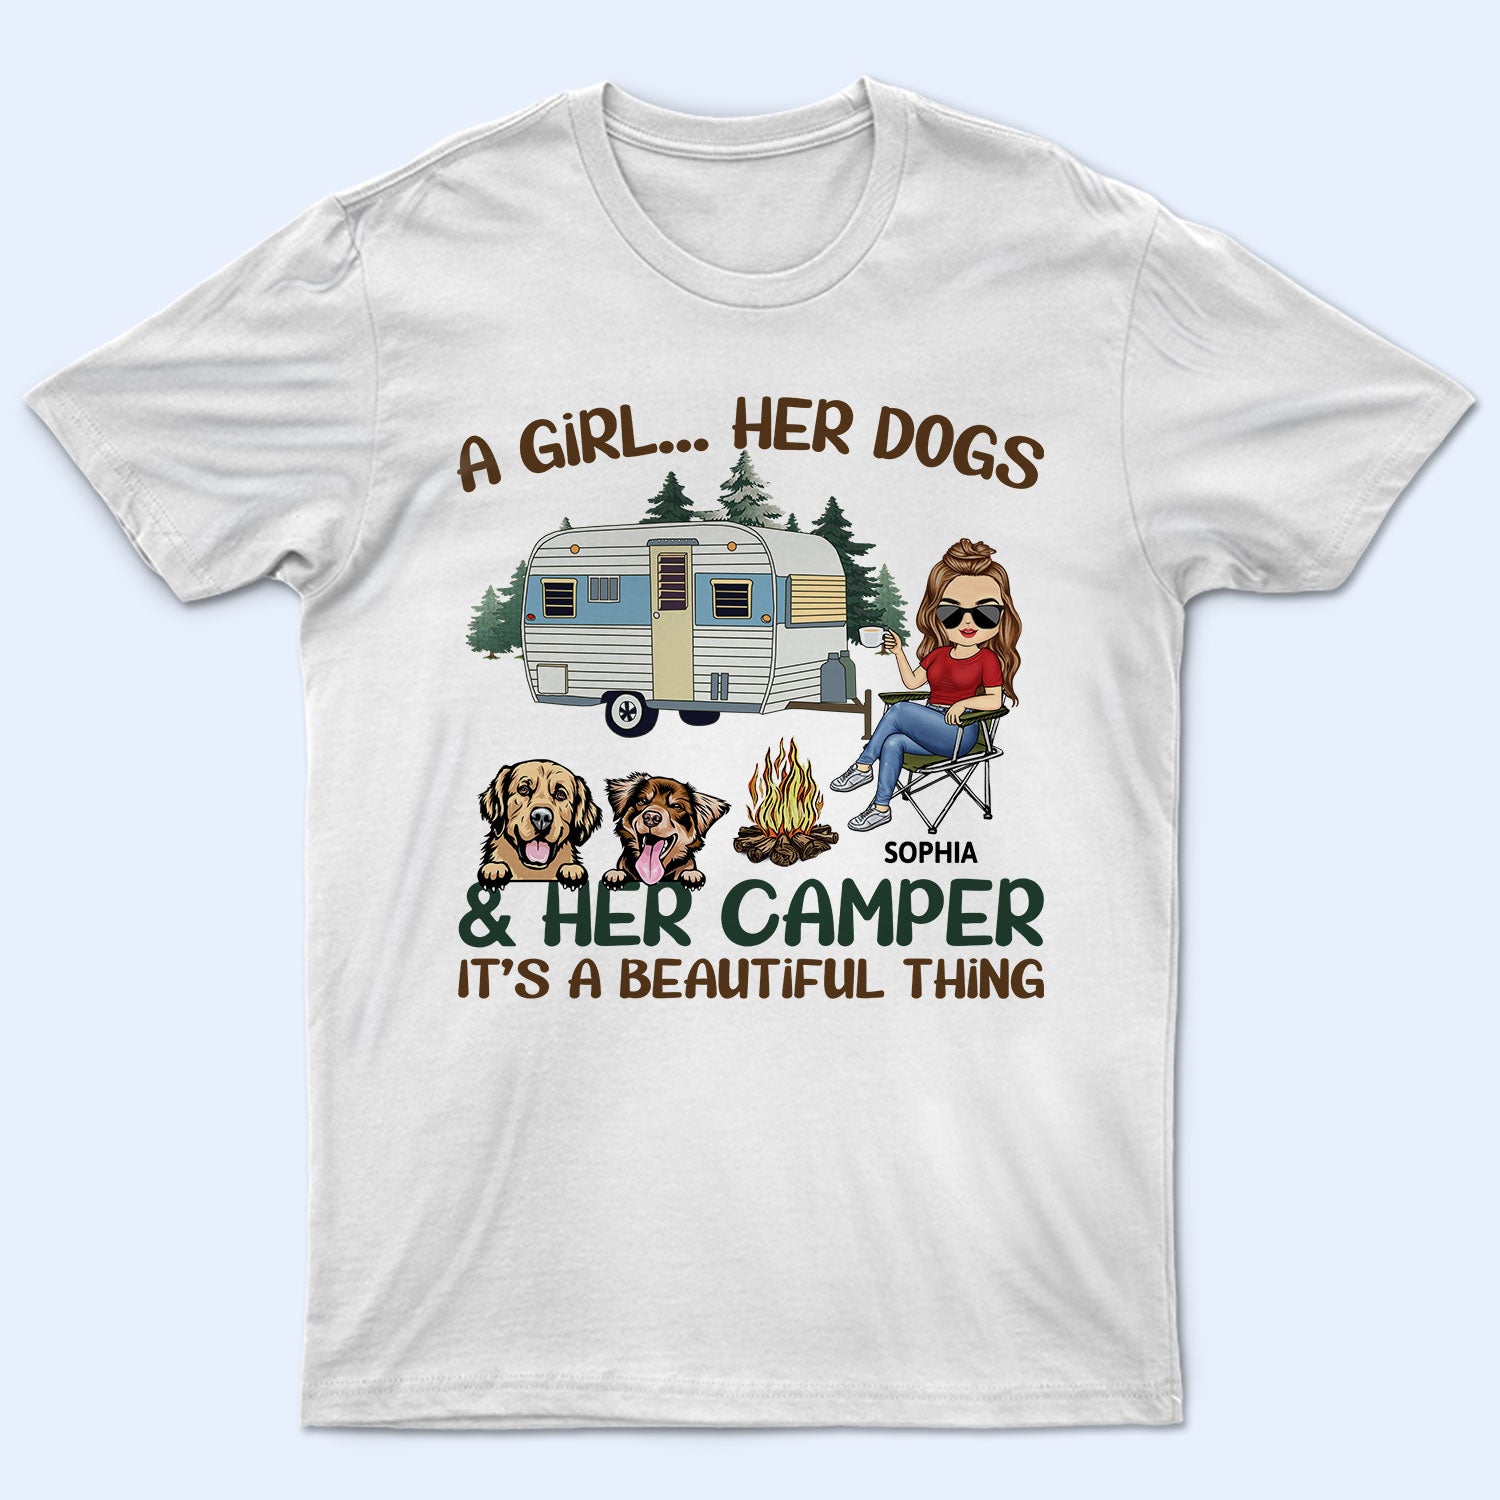 It's A Beautiful Thing - Camping Gift For Dog Lovers, Cat Lovers - Personalized T Shirt